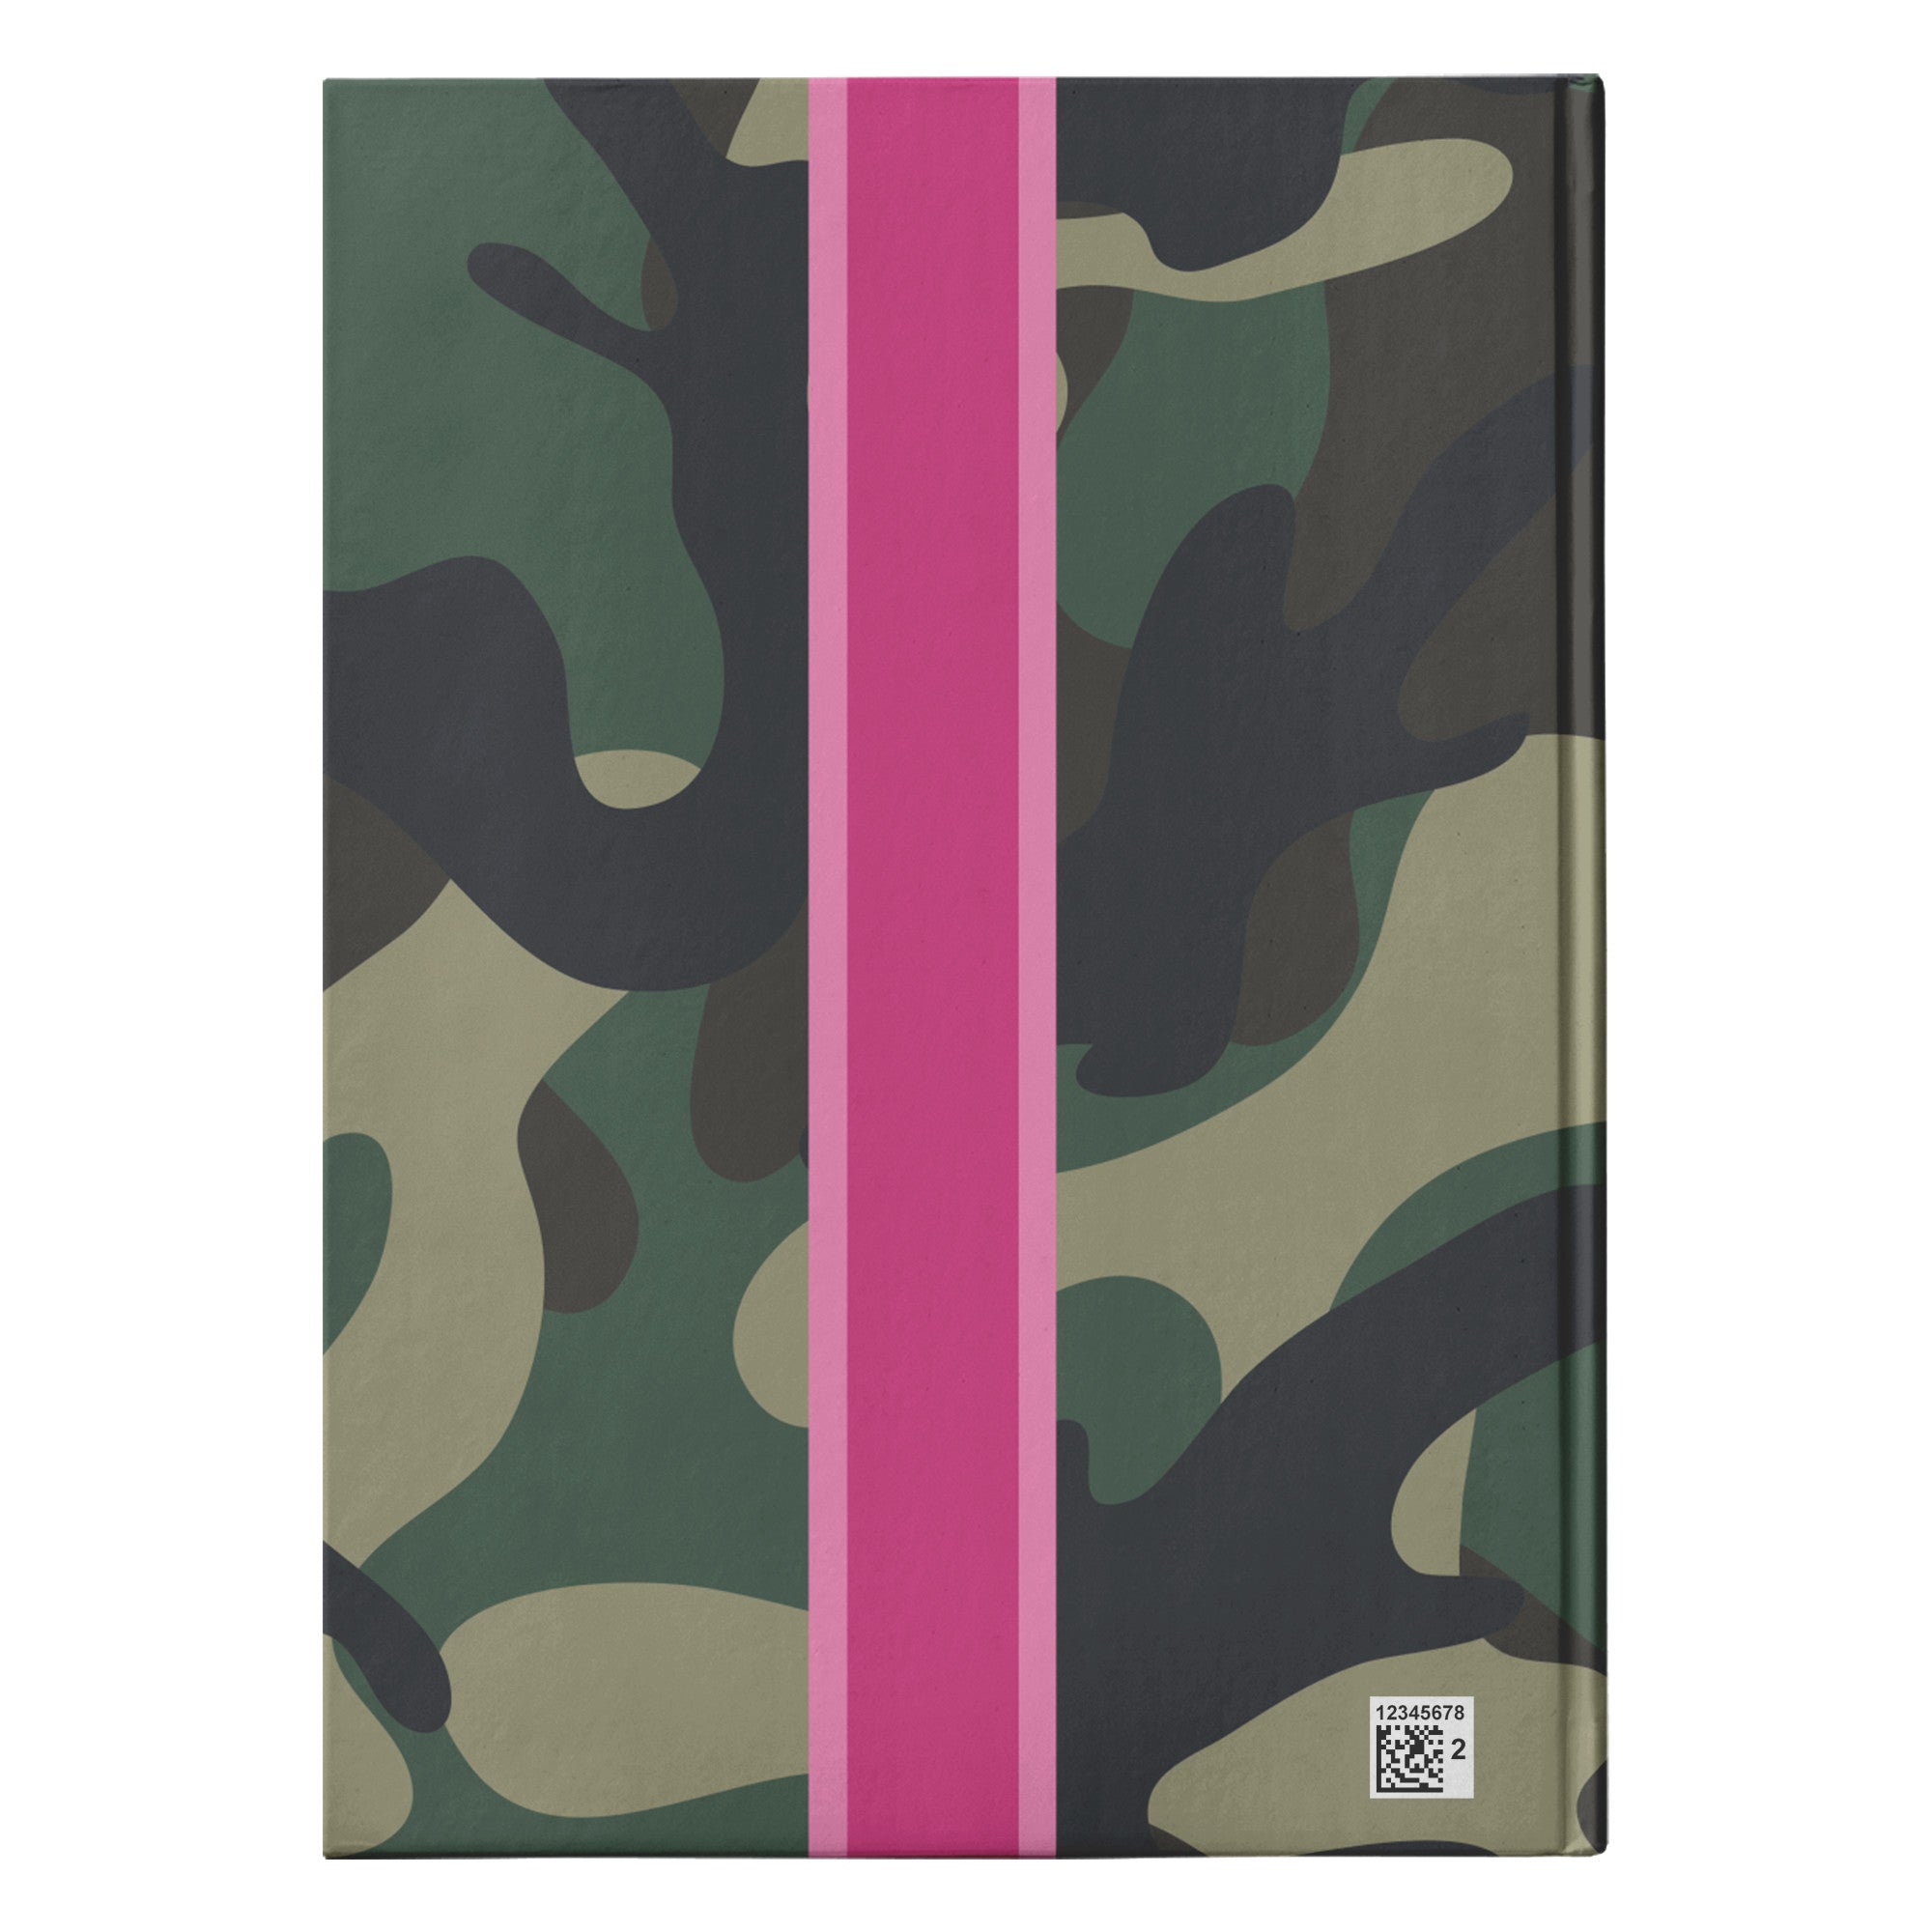 Camo Pink Stripe Hardcover Notebook & Journal - The Kindness Cause